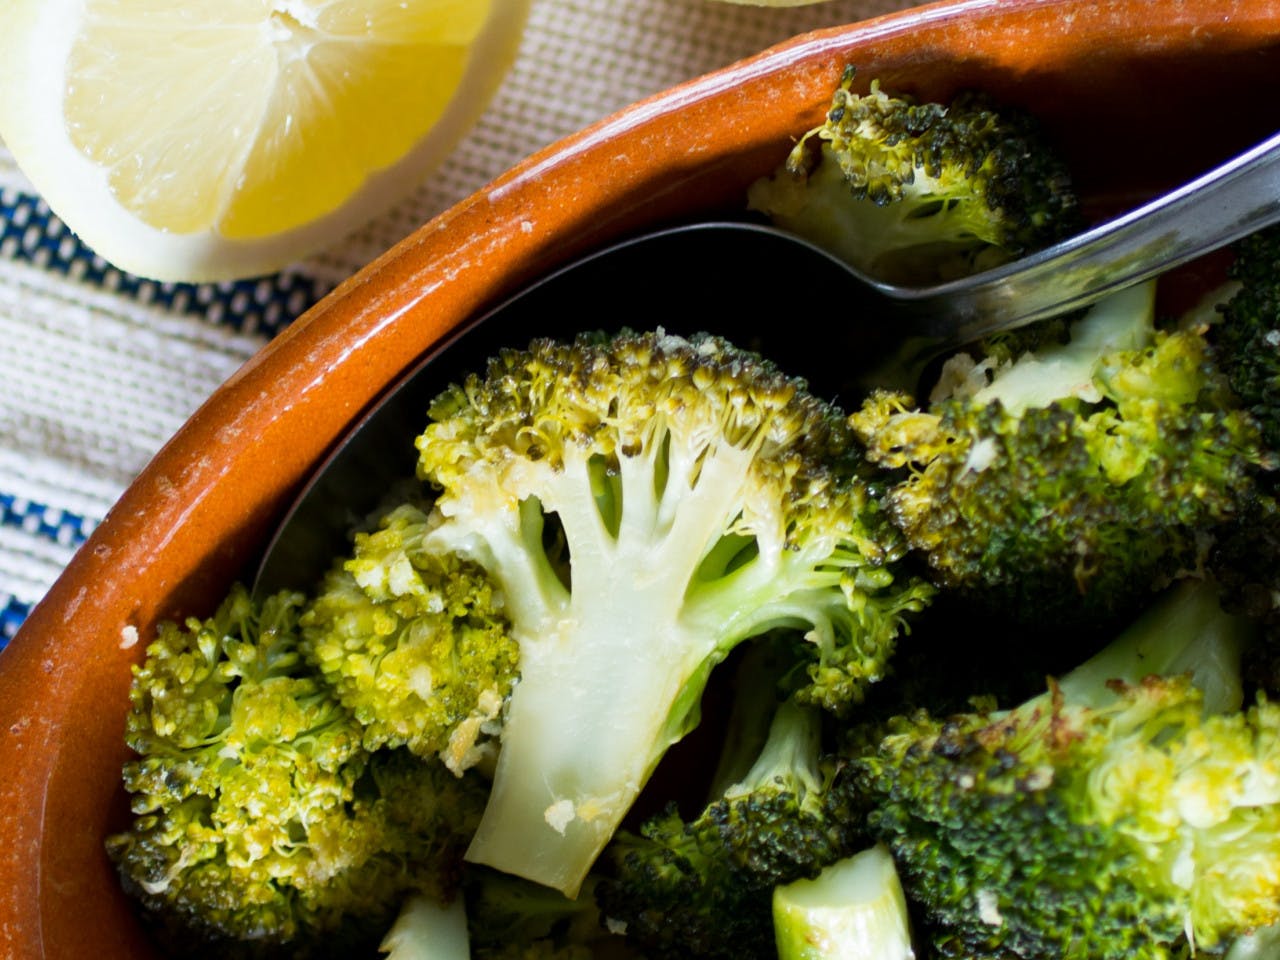 Roasted broccoli with lemon and ginger